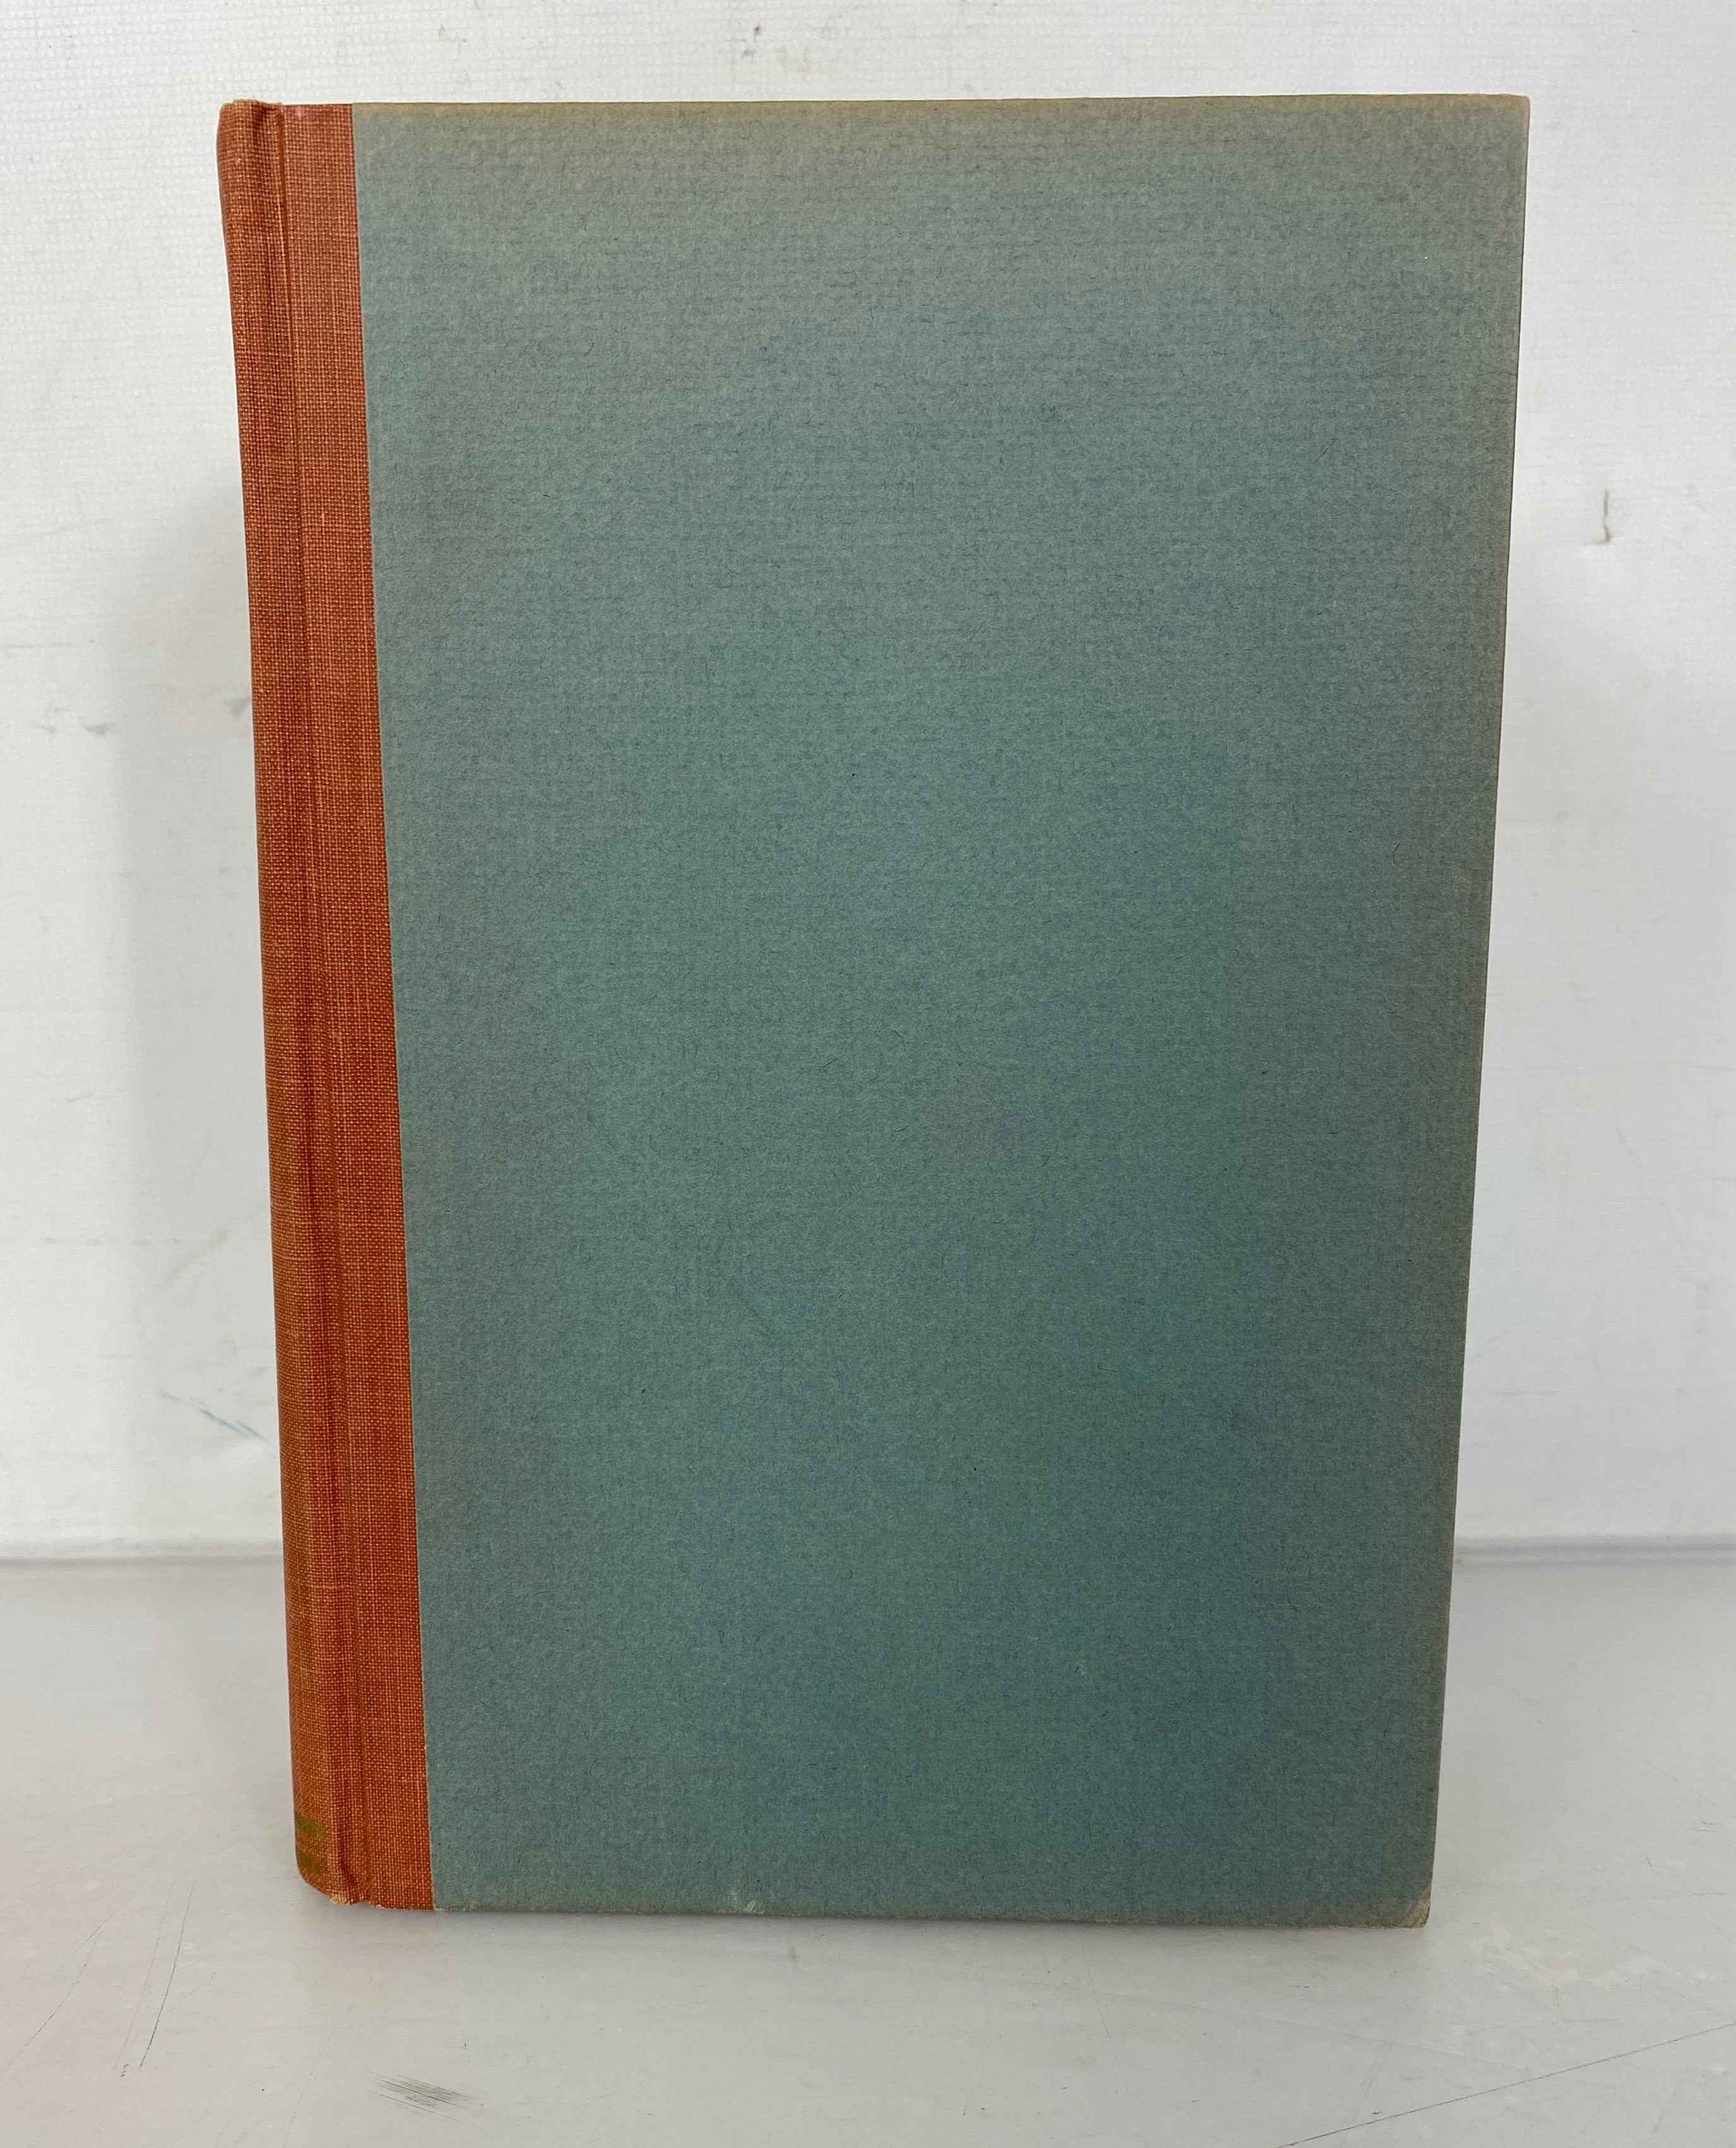 A Treasury of Science by Harlow Shapley Fourth Revised Edition 1958 HC DJ